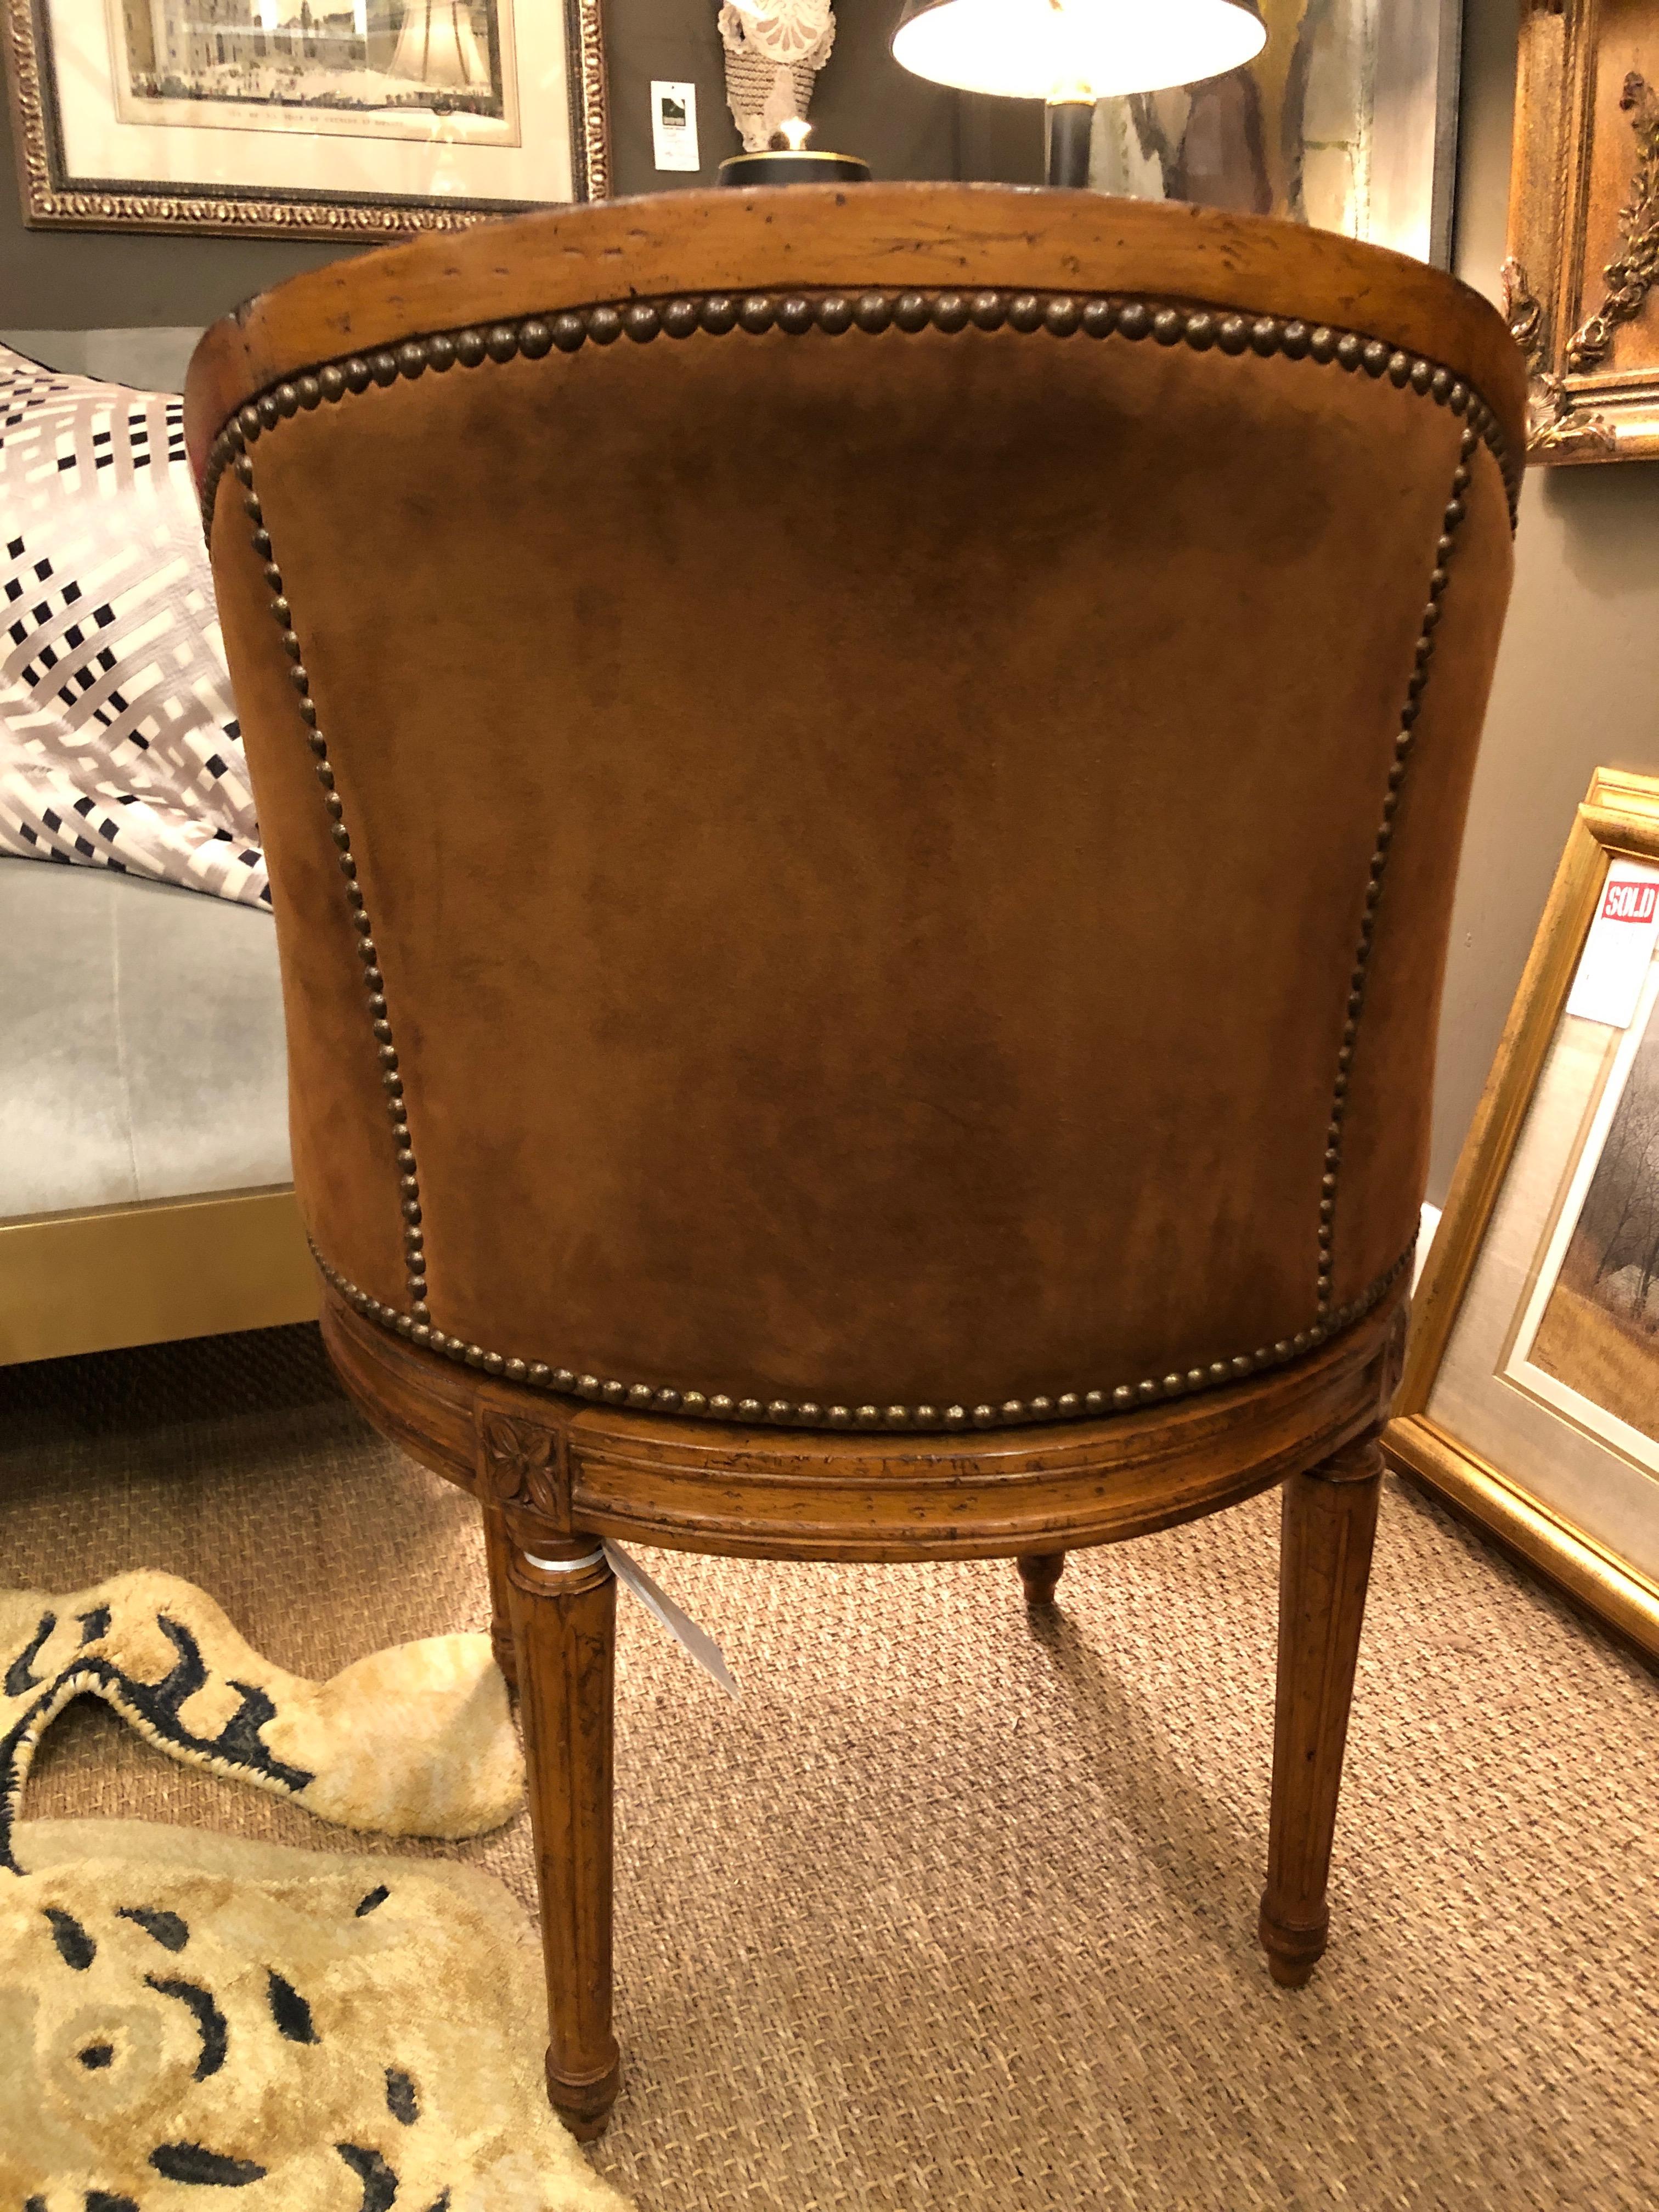 A suave compact beautifully made walnut swivel barrel chair, stunning from every angle, upholstered in black leather on the front, soft brown suede on the back, and finished with brass nailheads.
The legs are tapered and reeded and there is